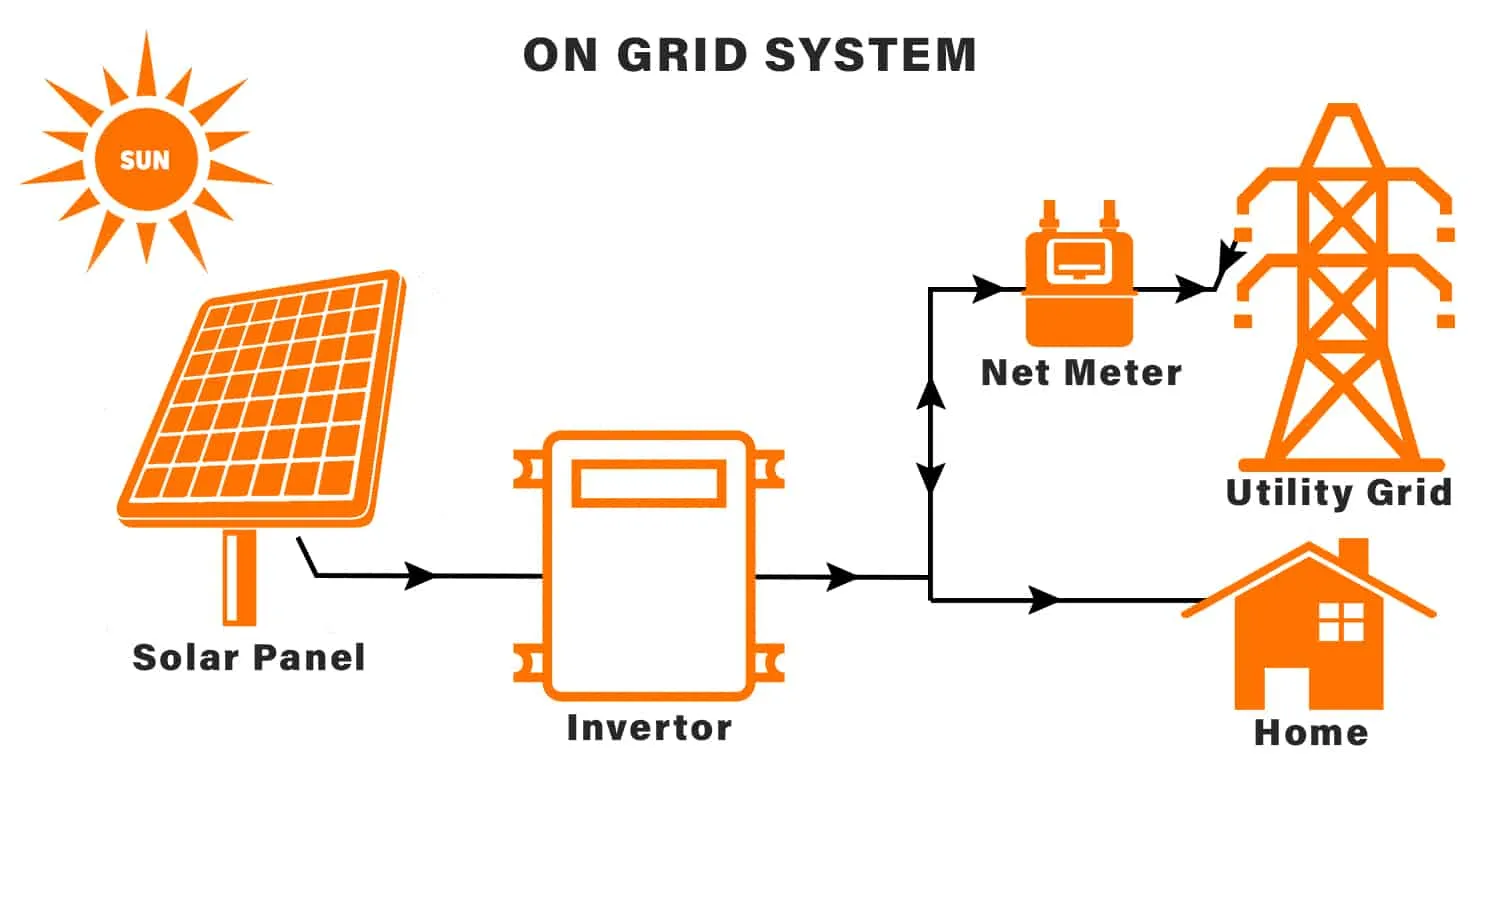 On grid solar system working entry image